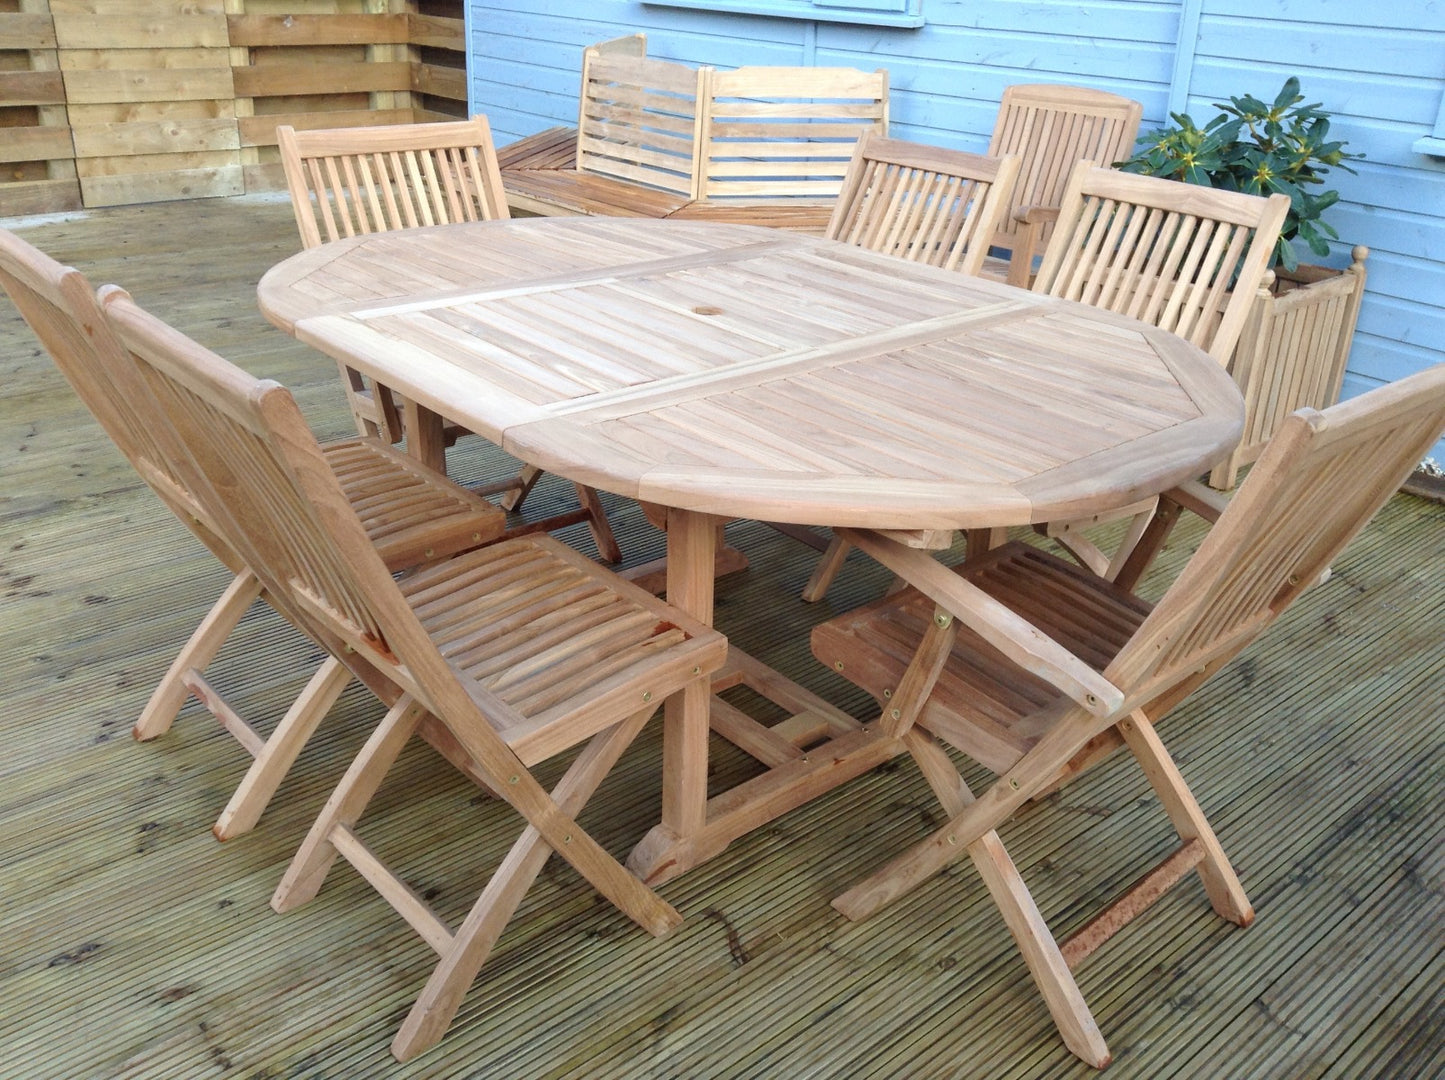 6 Seater Oval Pedestal Teak Set with Folding Chairs & Armchairs